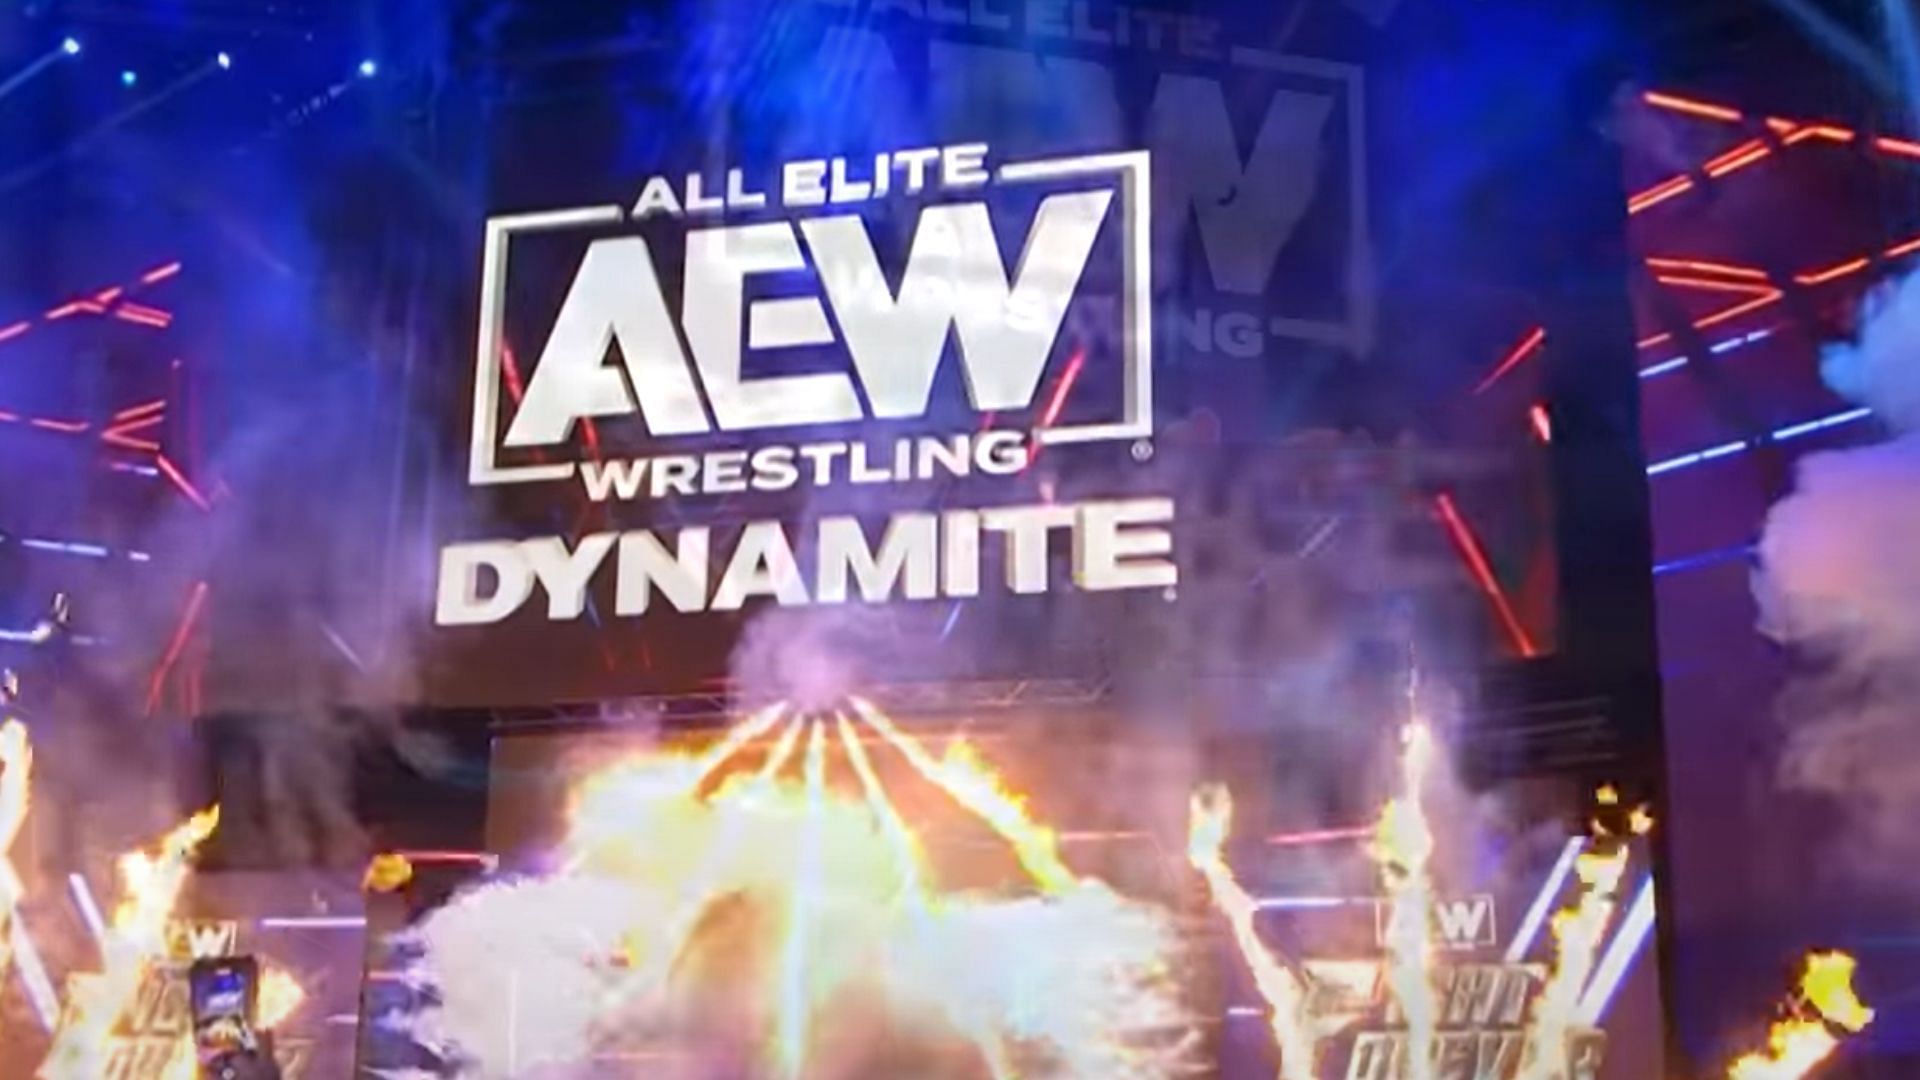 AEW has a reputation of working with other wrestling promotions